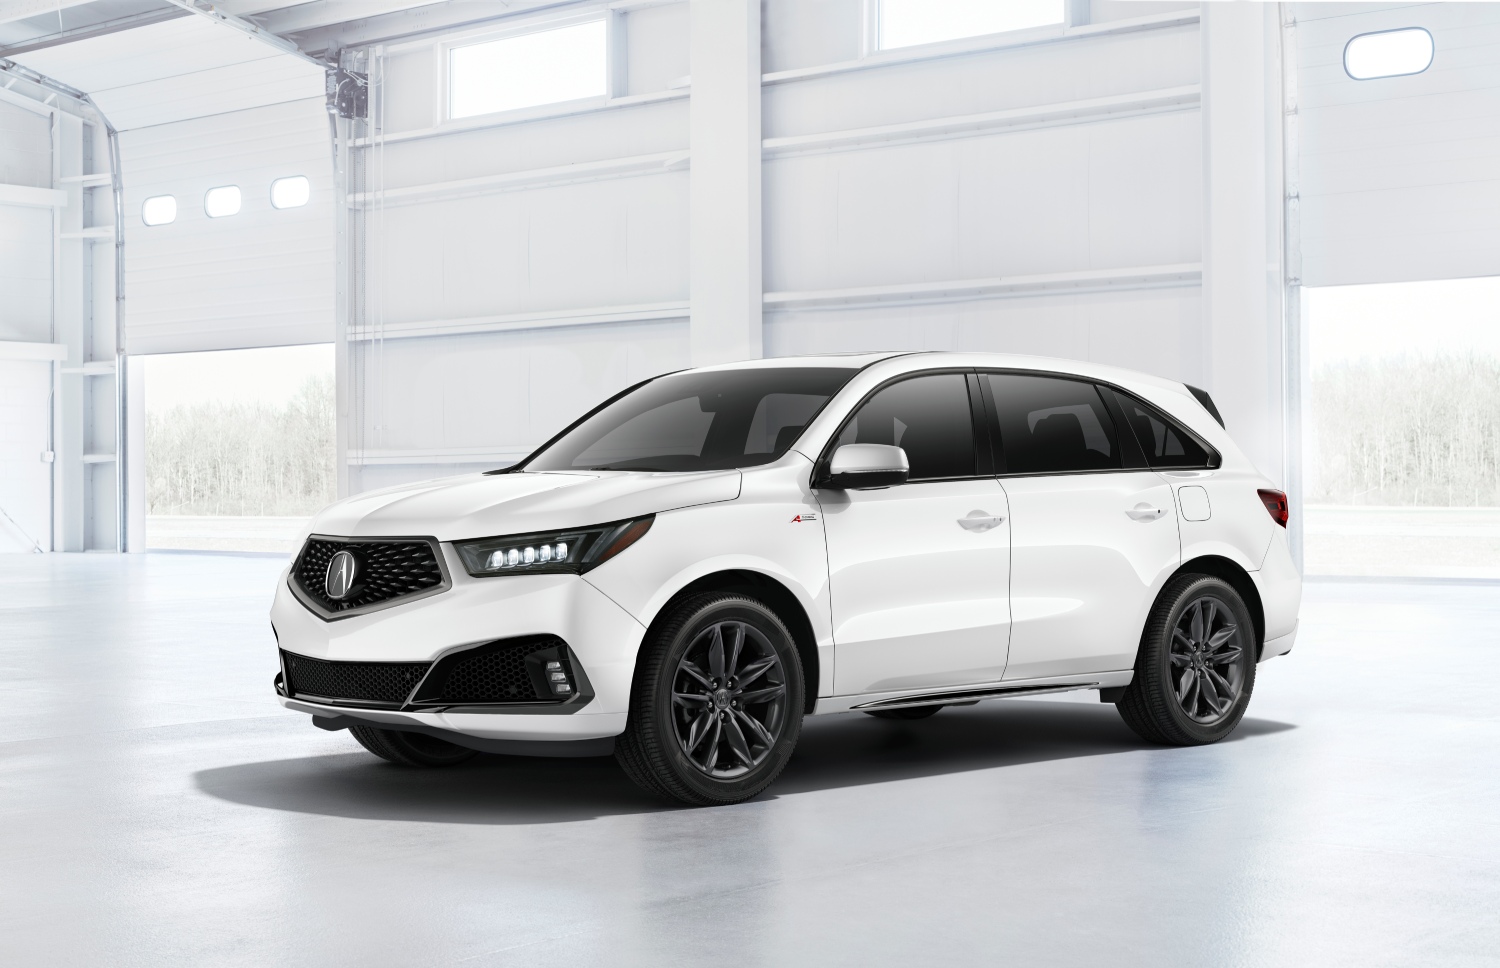 The best used Acura MDX SUV years include this 2019 version